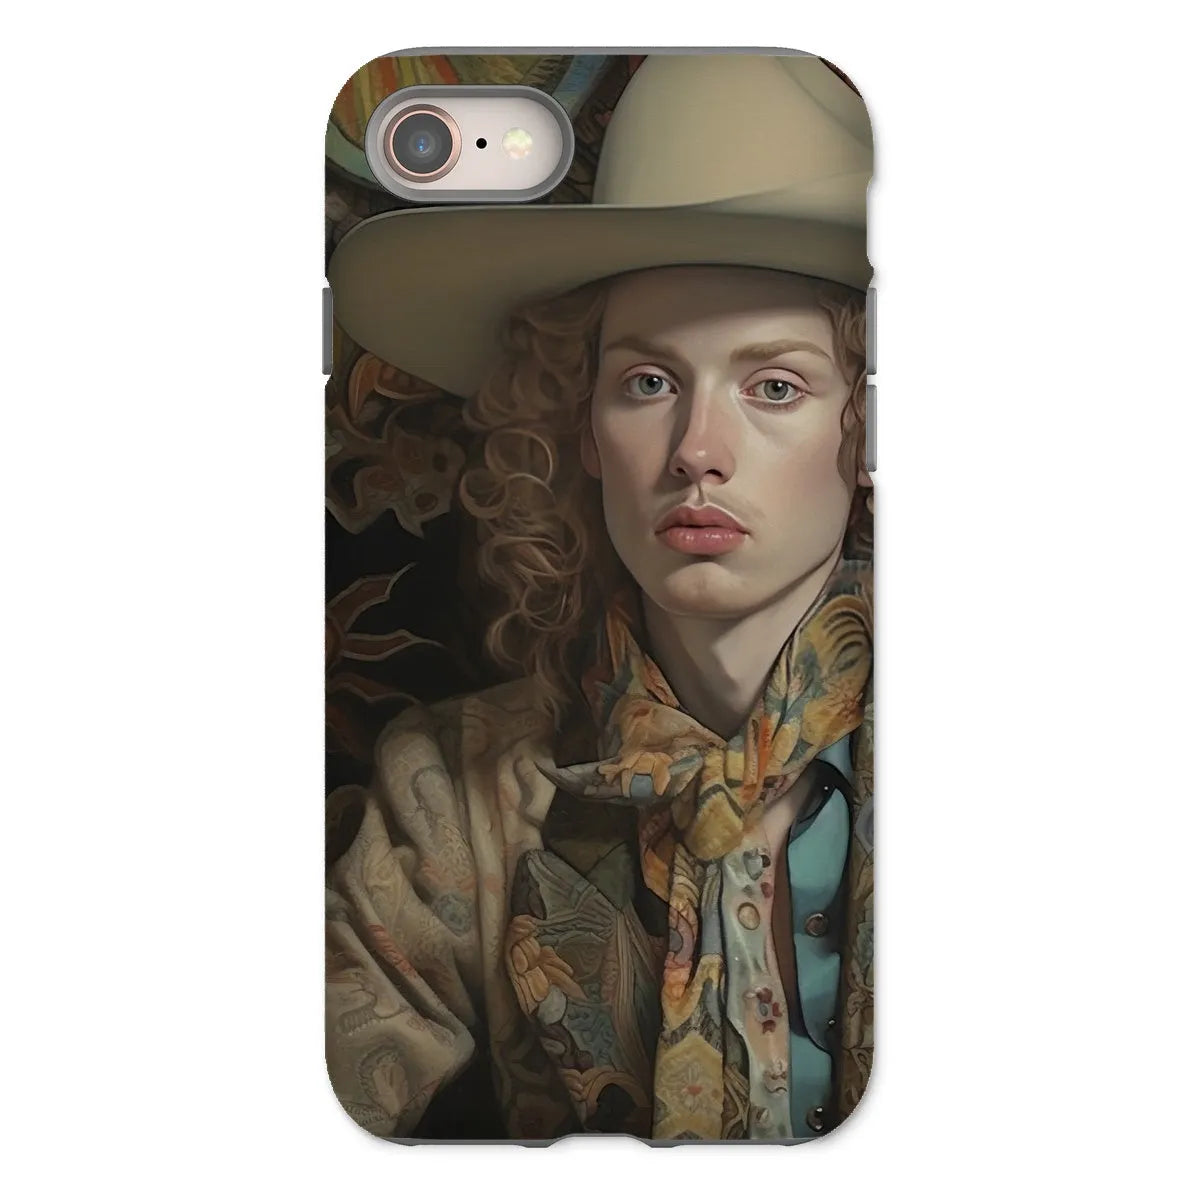 Ollie The Transgender Cowboy - F2m Dandy Outlaw Phone Case - Iphone 8 / Matte - Mobile Phone Cases - Aesthetic Art